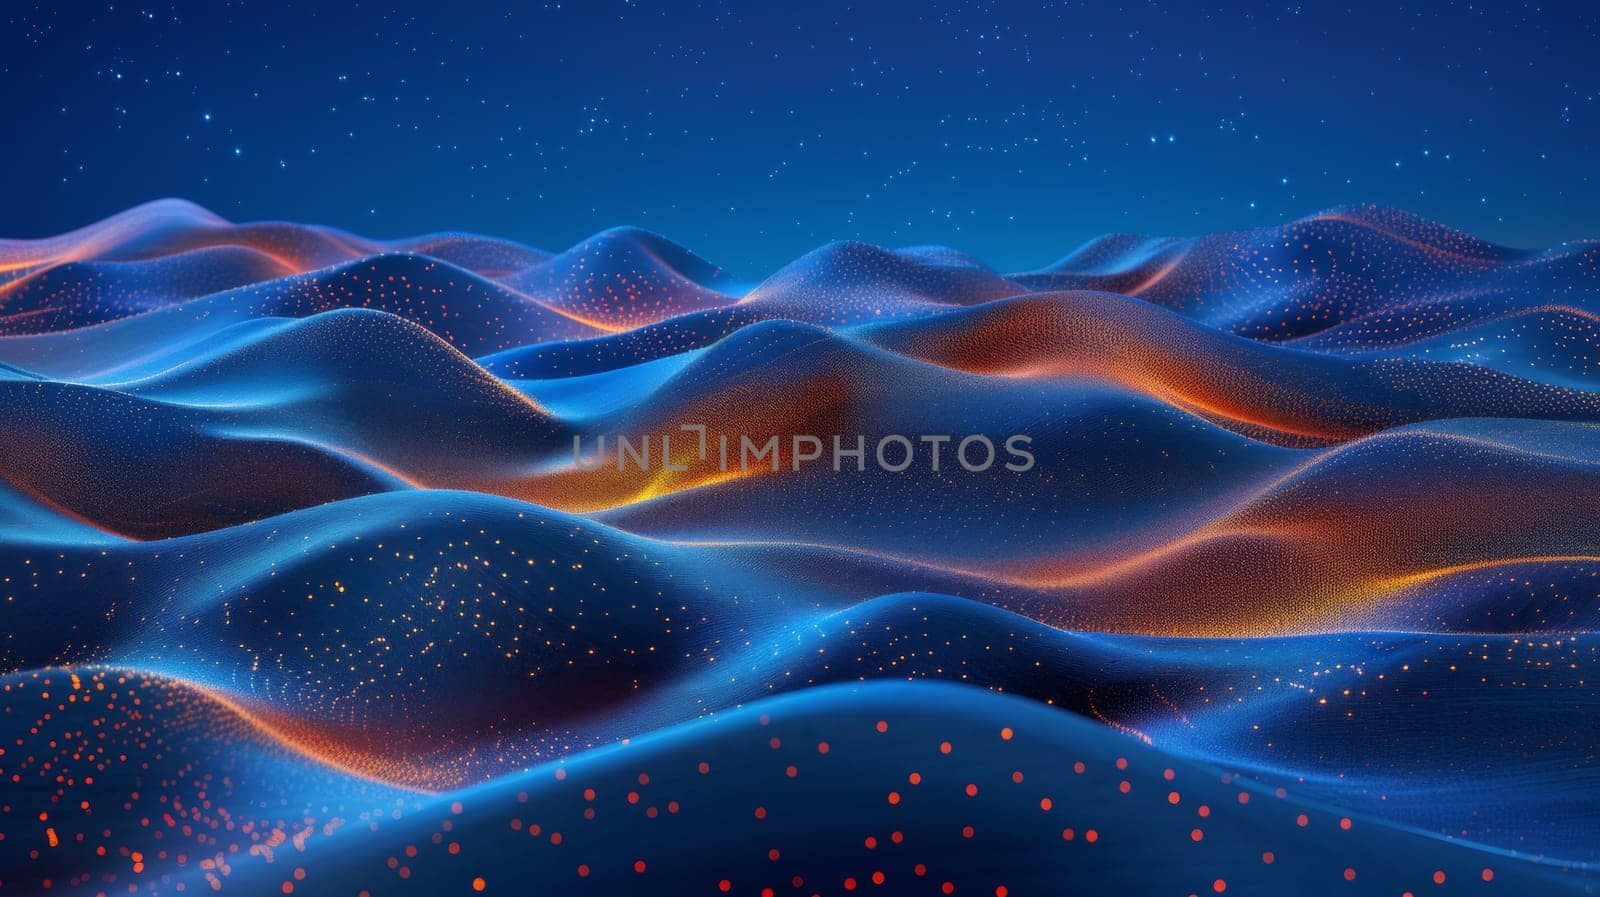 A digital painting of a landscape with glowing lights and stars